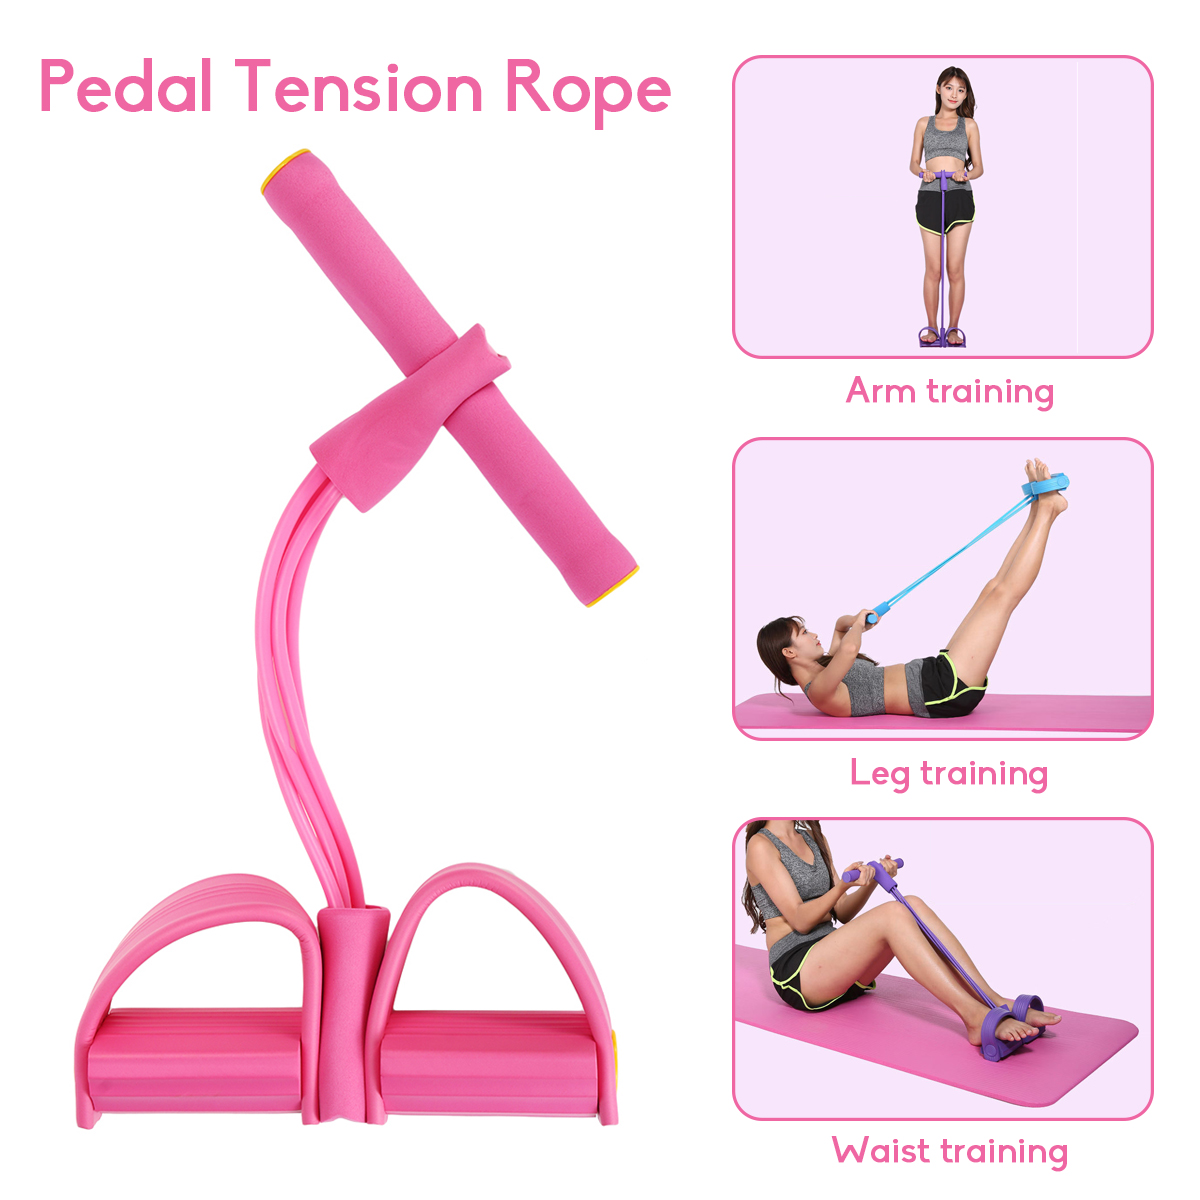 5Pcs Yoga Mats Set Pedal Tension Rope Yoga Ring Indoor Exercise Fitness Kit